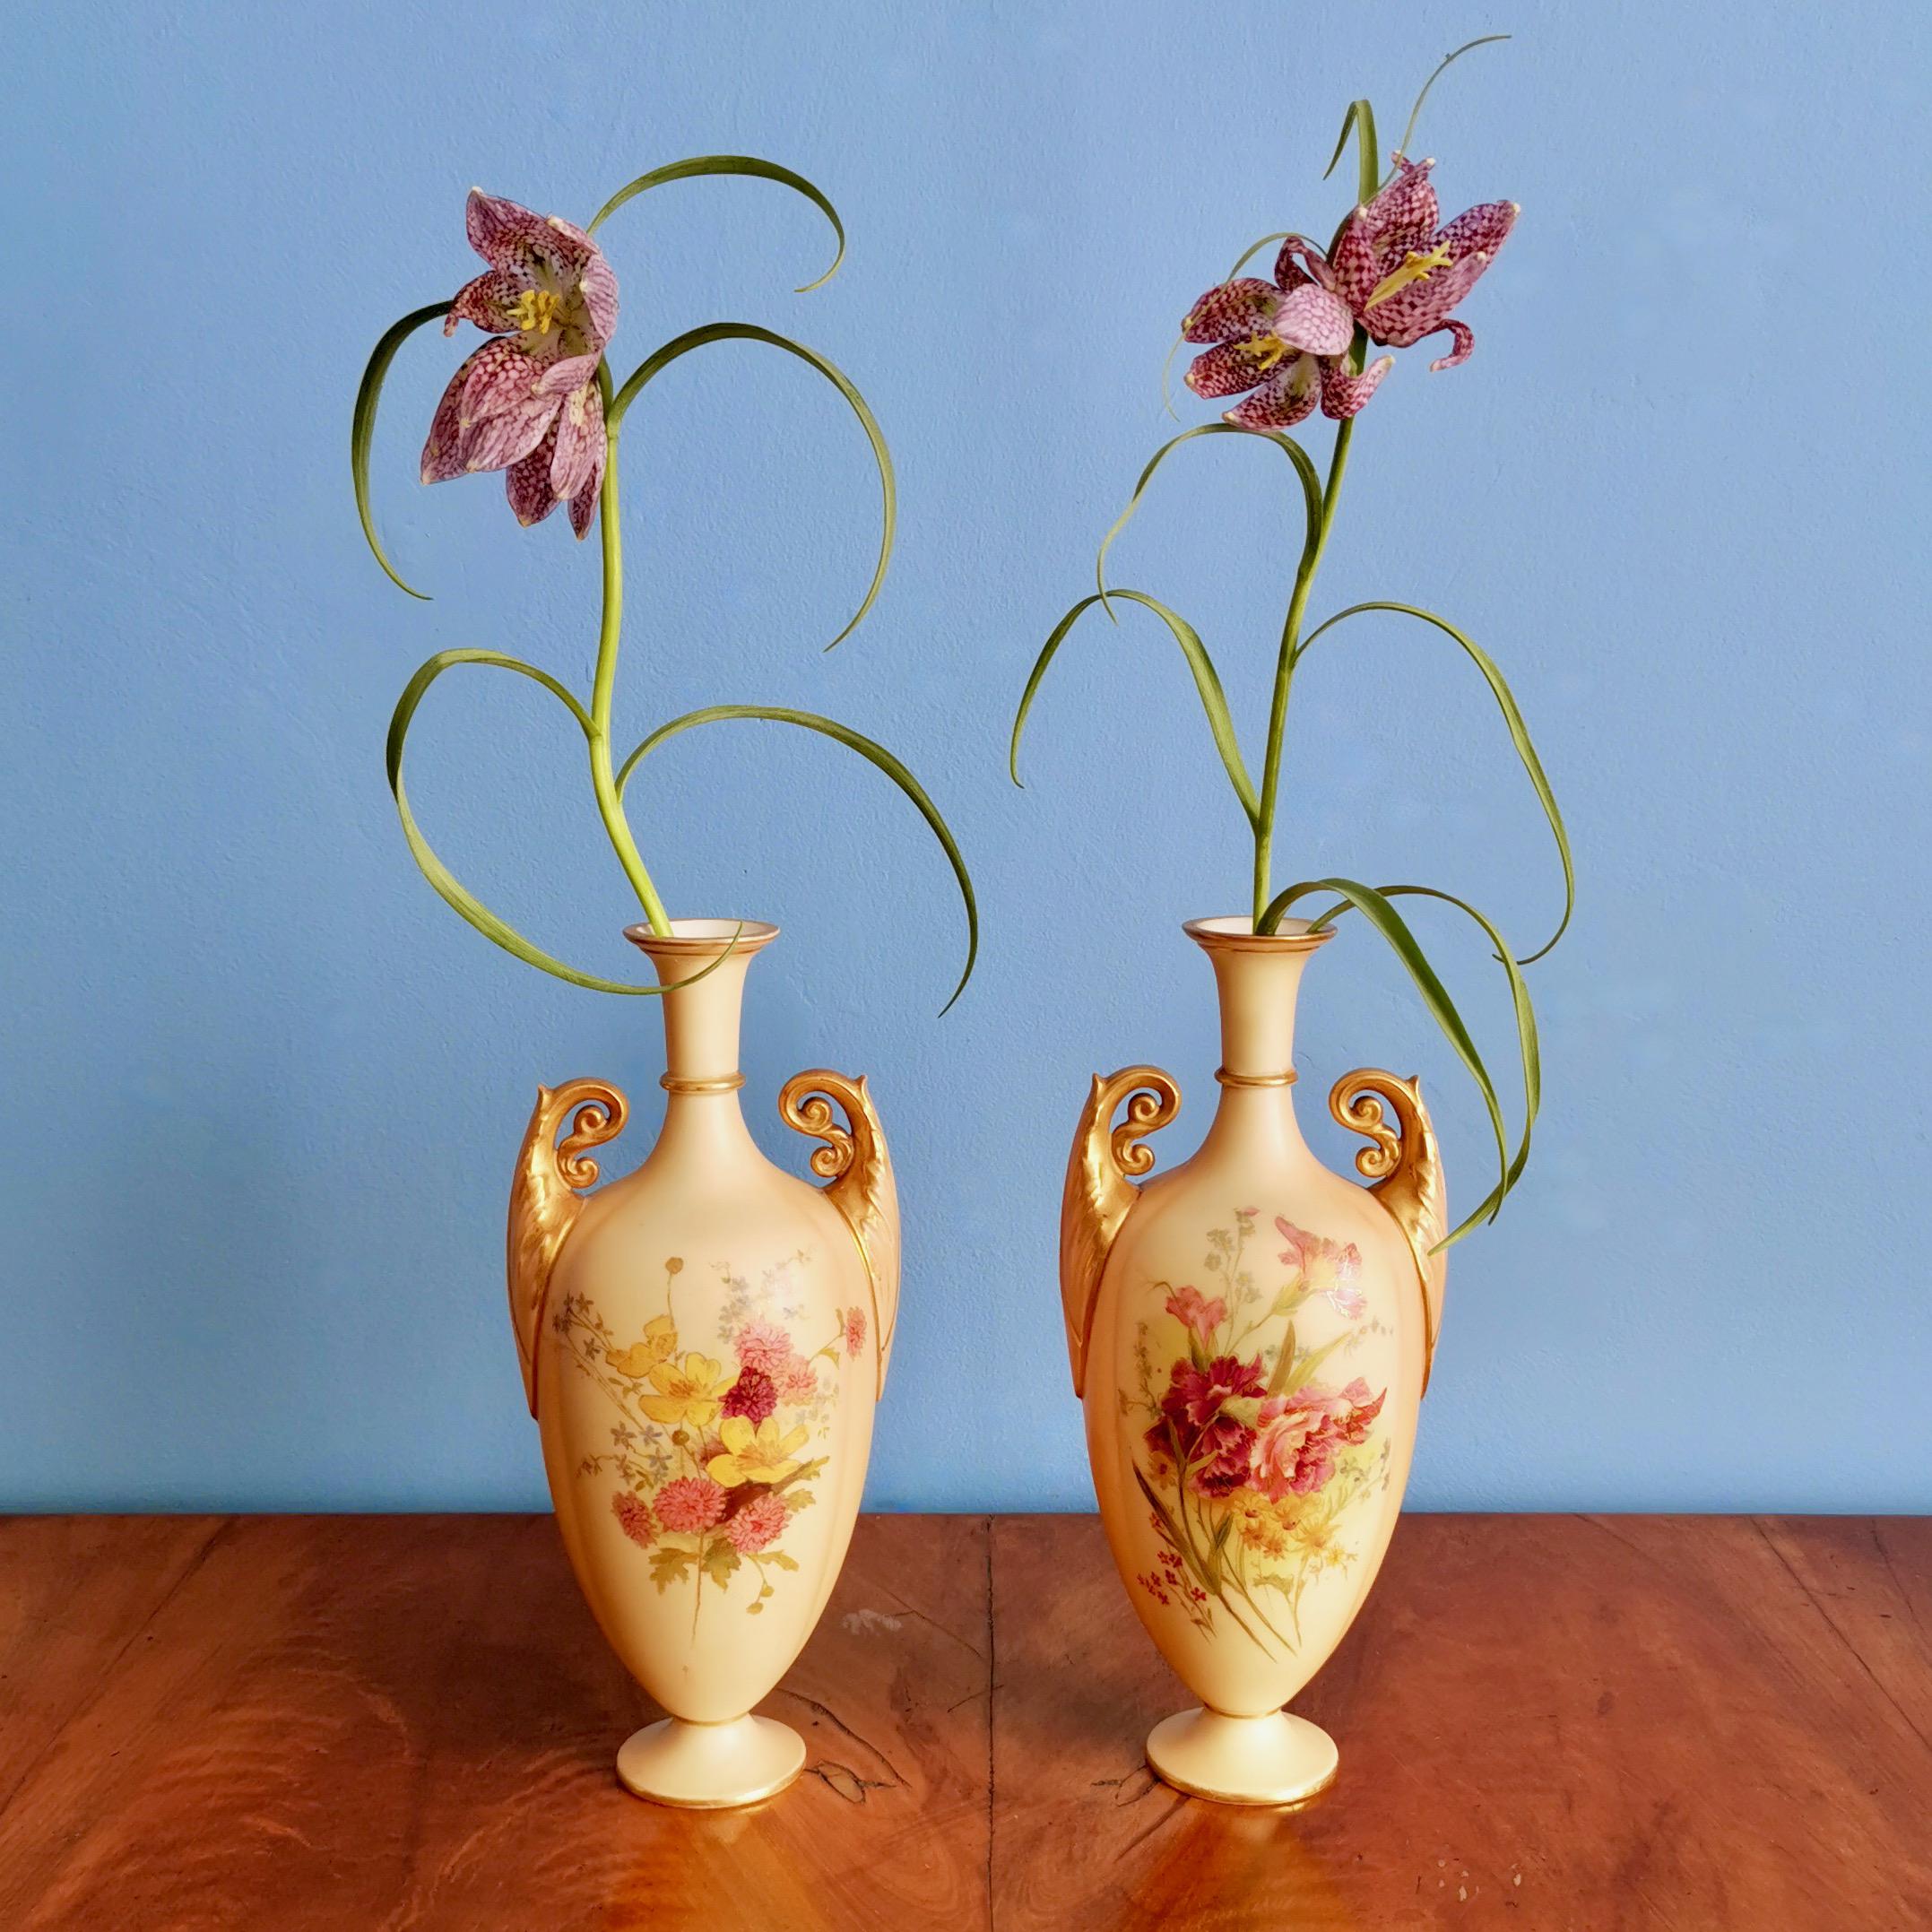 This is a very fine pair of small vases made by Royal Worcester in 1907. The vases have a 